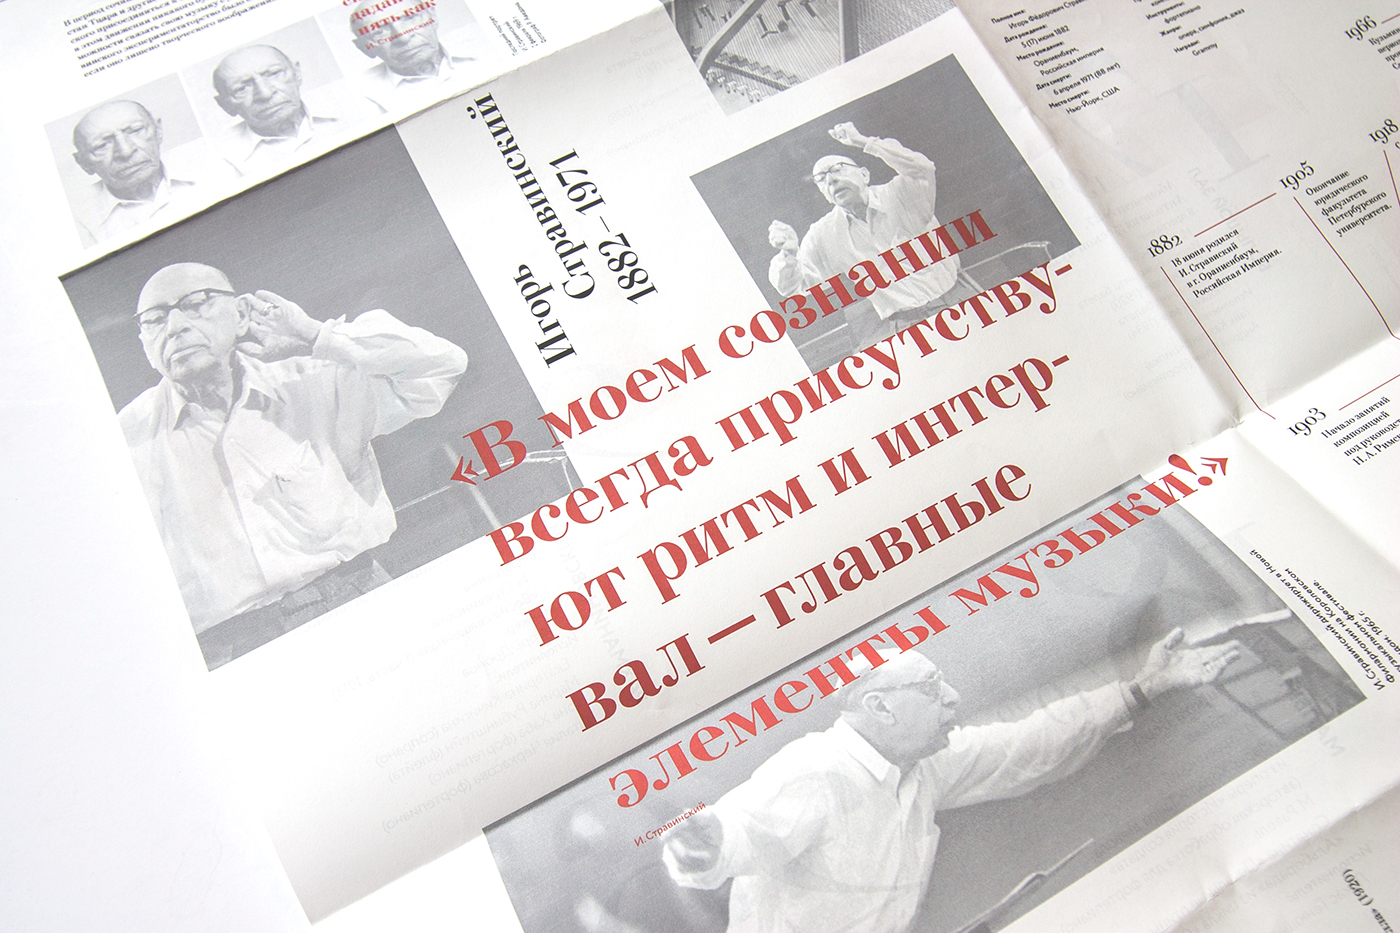 igor stravinsky russian ballet classic music Musik conservatory Moscow conservatory ballet graphic design  Booklet identity